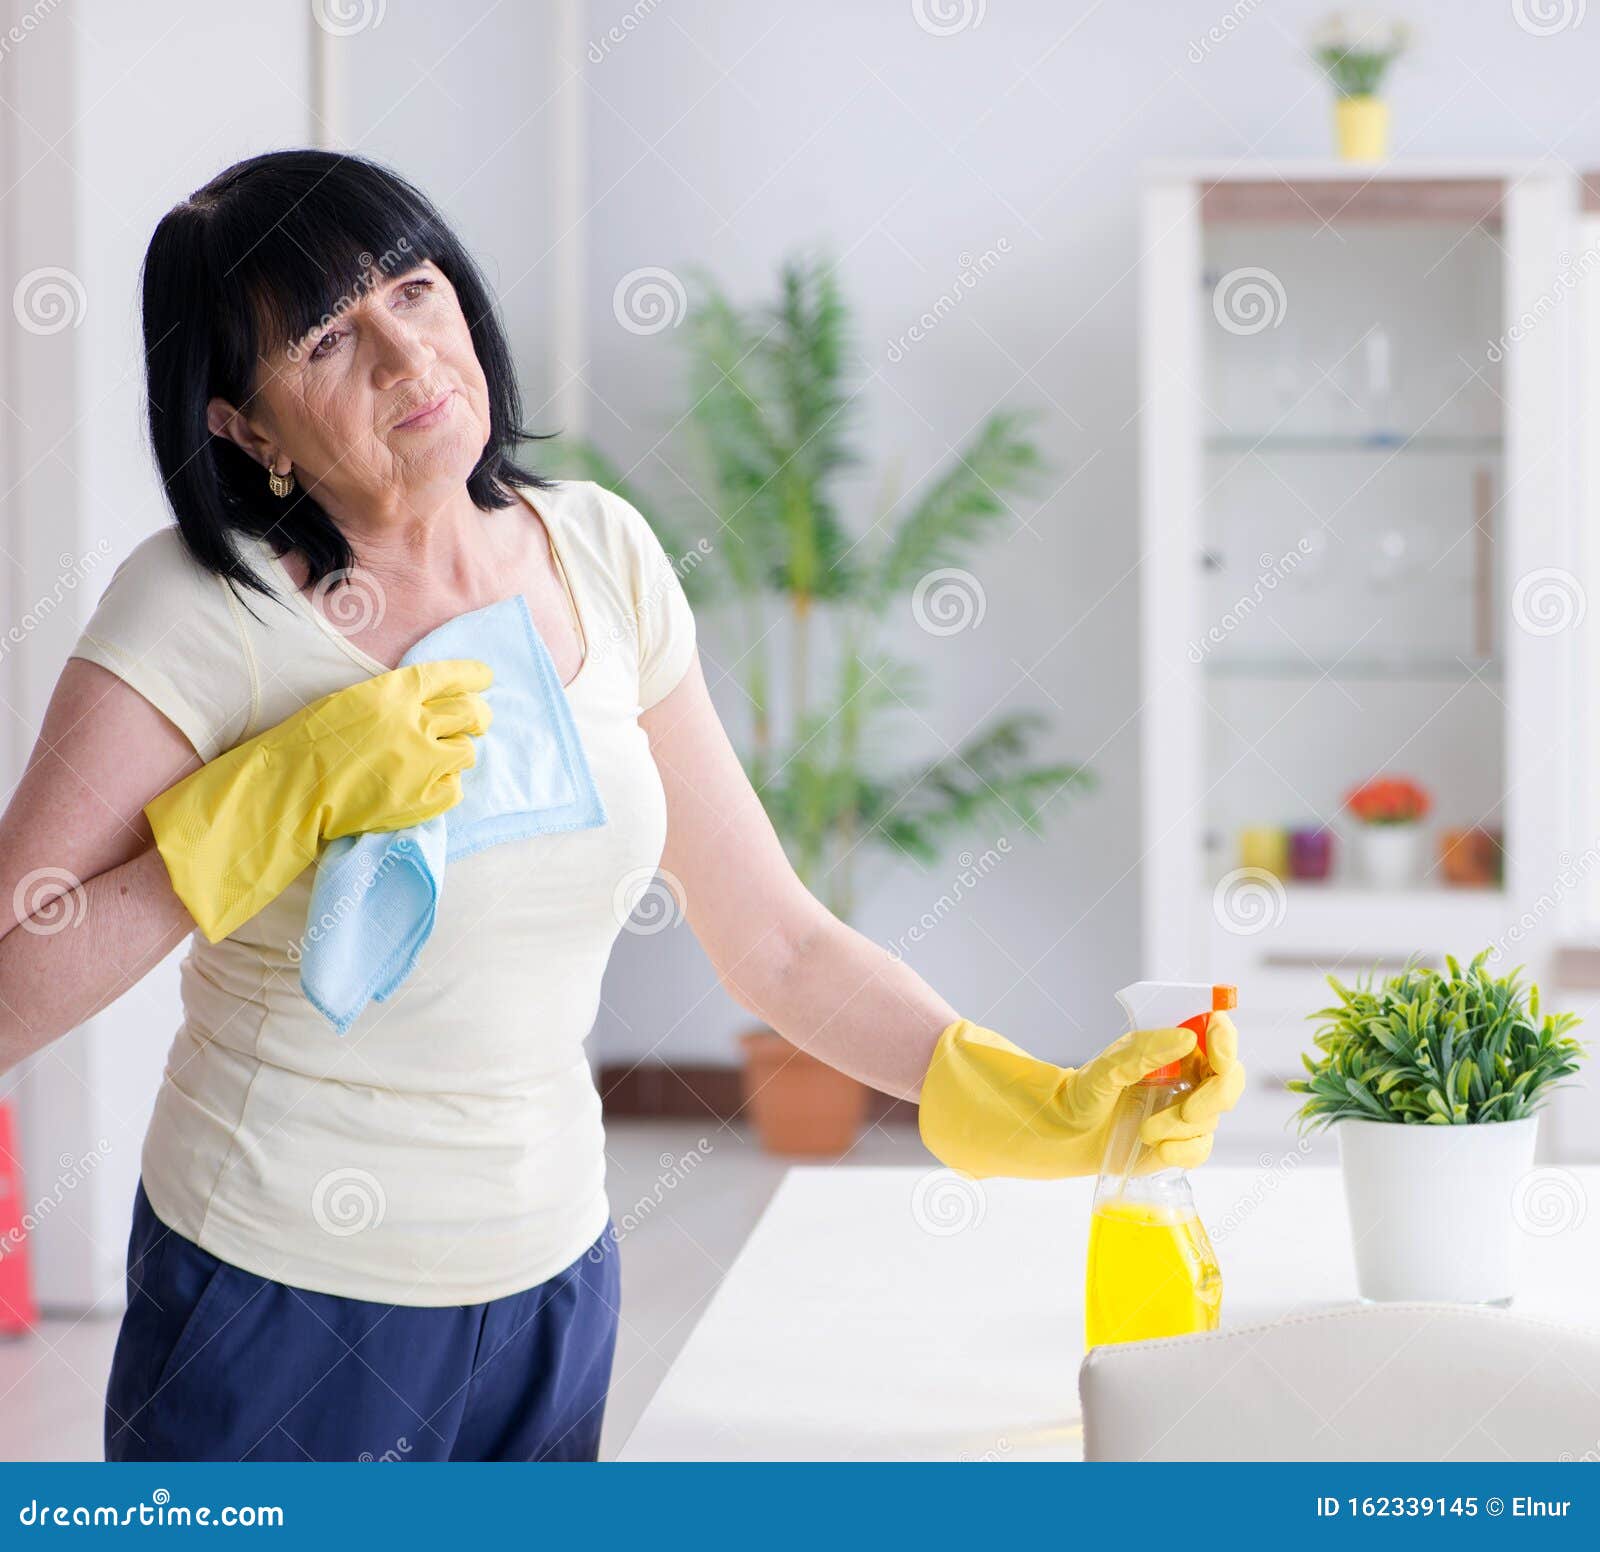 Old Mature Woman Tired After House Chores Stock Image Image Of